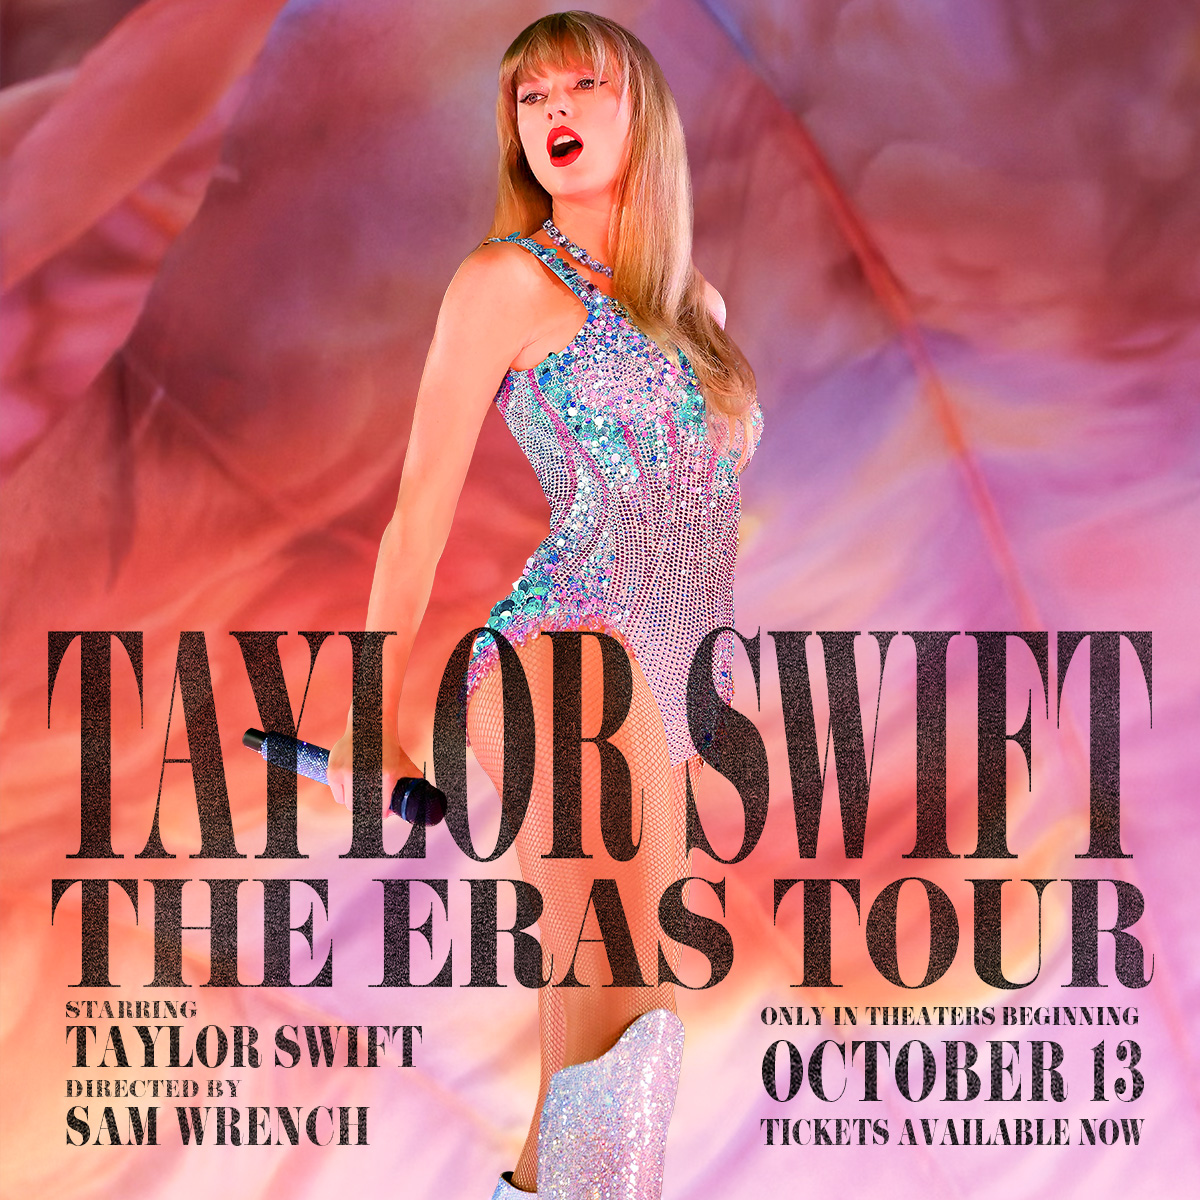 Are you Ready For It?
.
9 days until #TSTheErasTourFilm opens 👀 

Get tickets now to see TAYLOR SWIFT | THE ERAS TOUR on the big screen opening 10/13.

#TSTheErasTourFilm #TSTheErasTour
@taylorswift13  
@TSTheErasTourFilm
@TaylorNation13 #WaterTowerCinema #LansdalePA